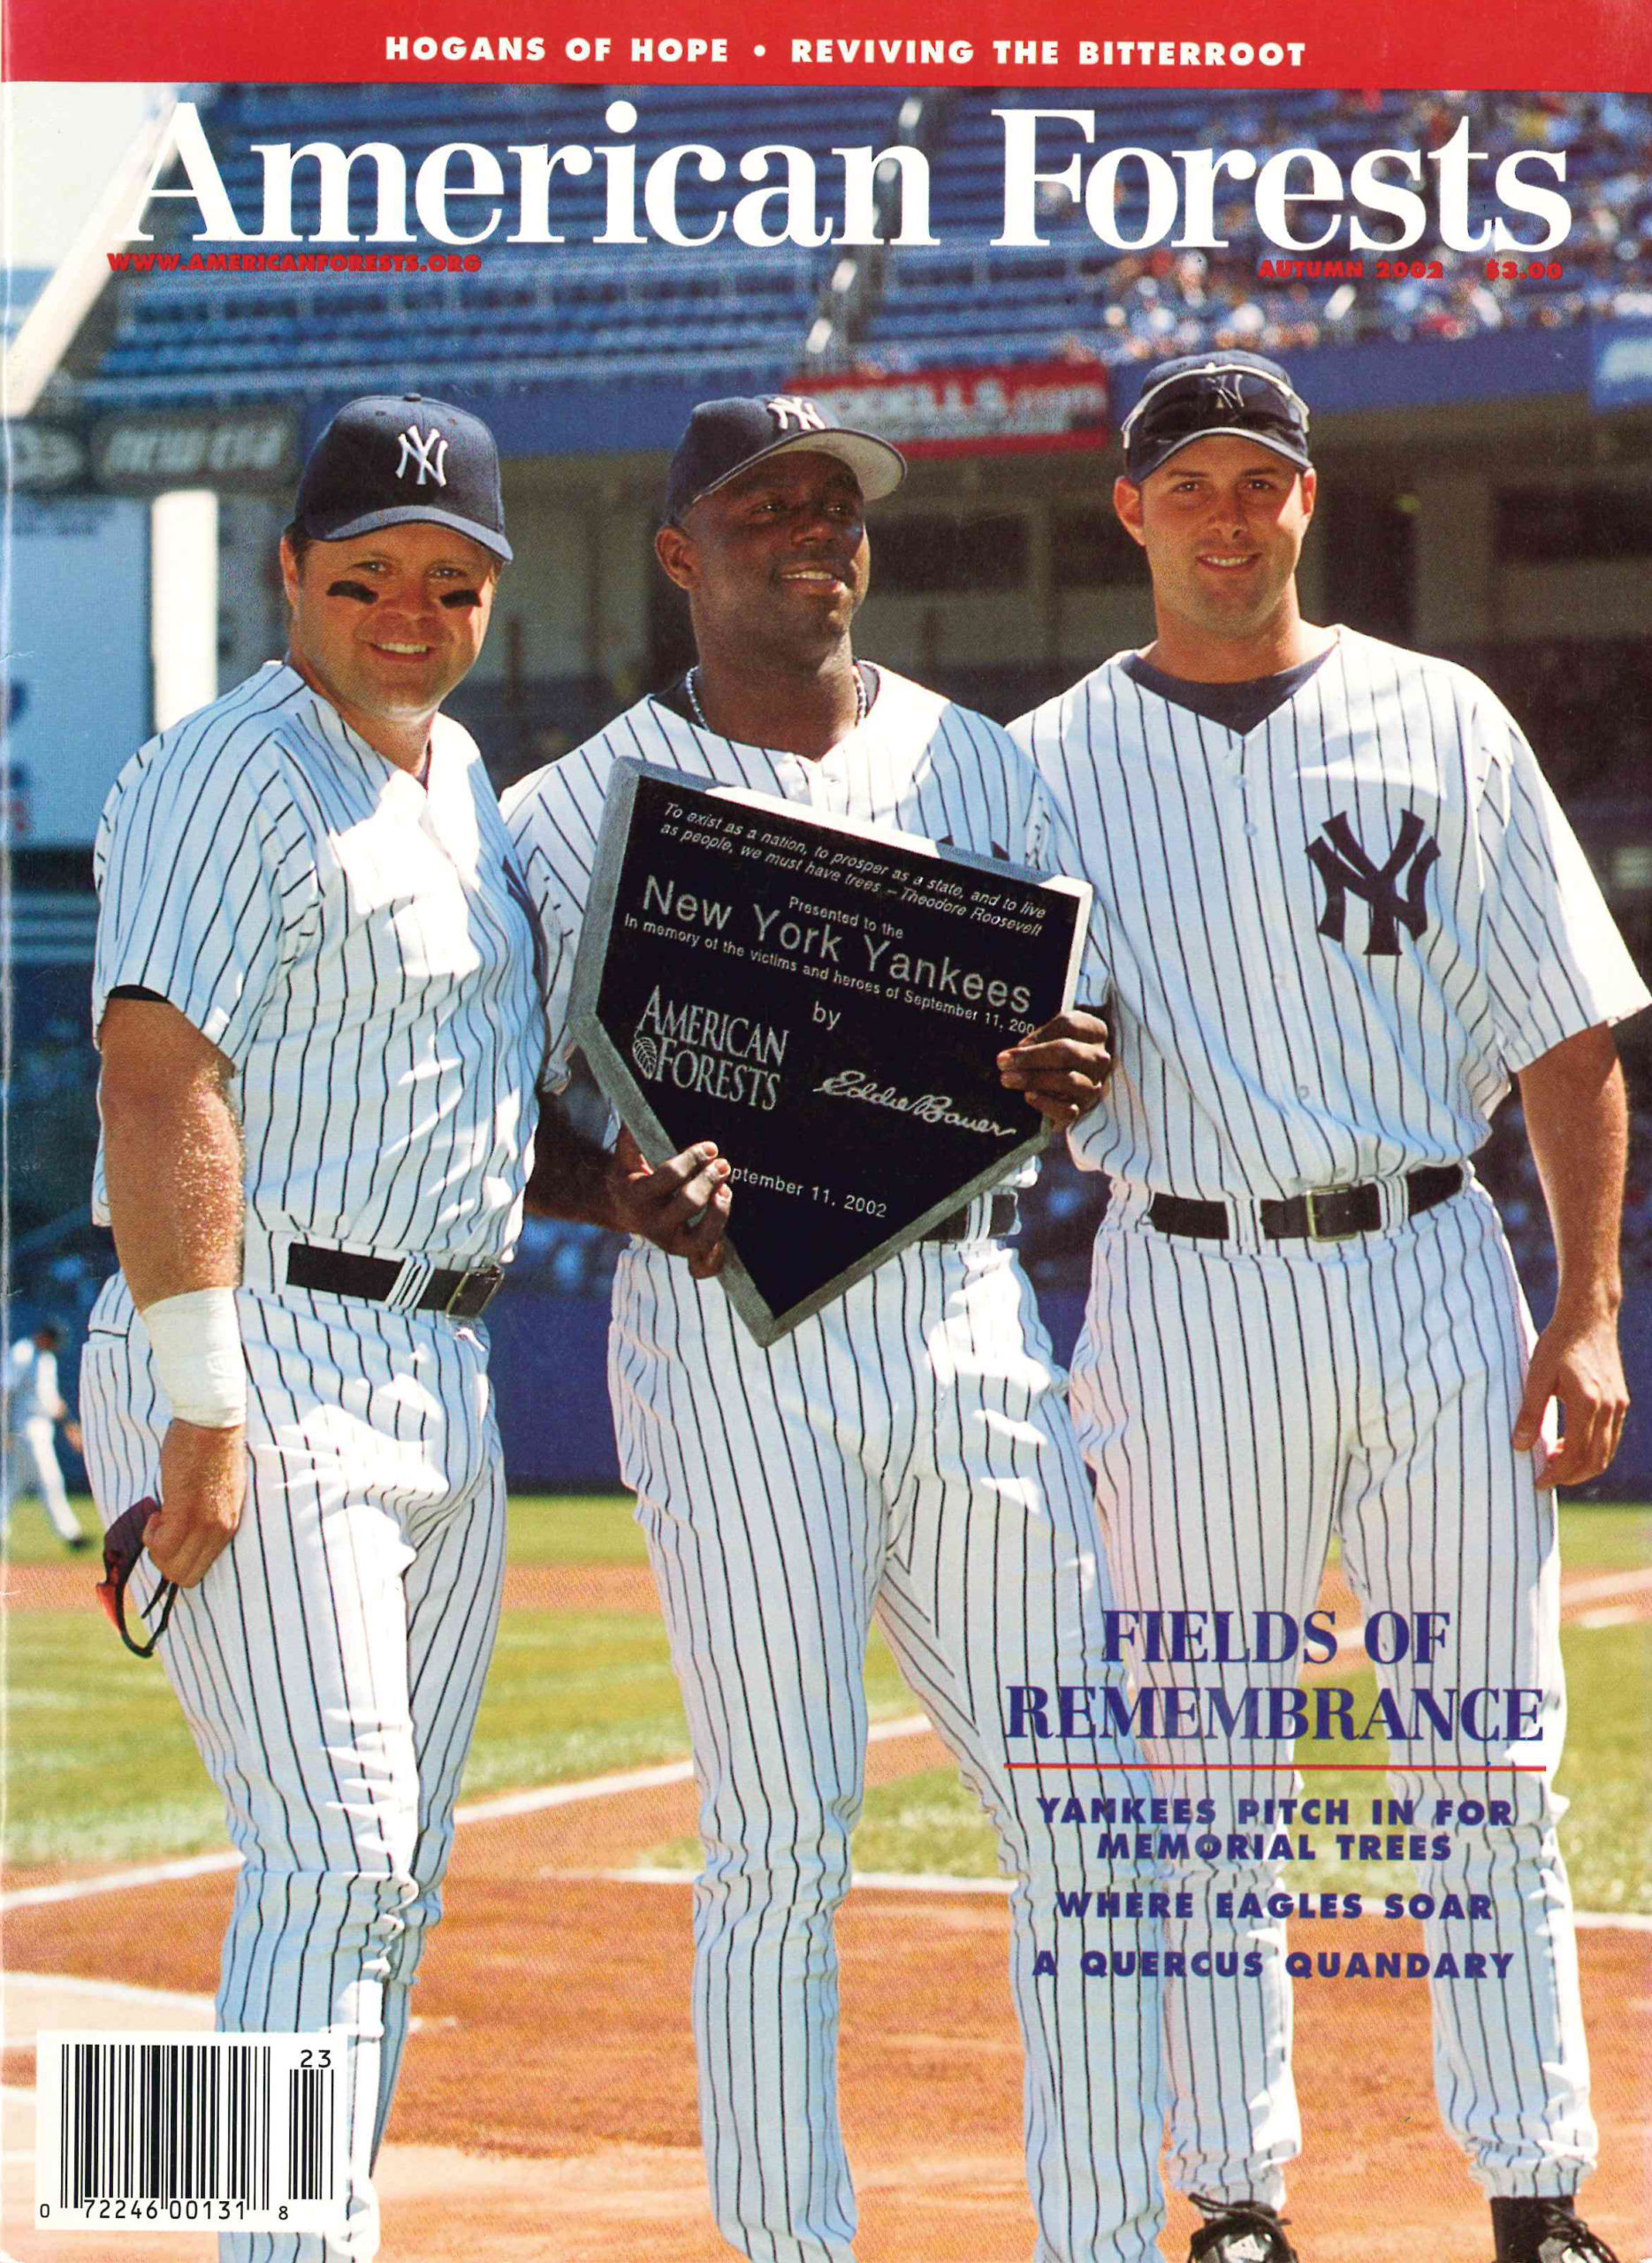 In September 2002, American Forests and the New York Yankees planted the first of thousands of trees in Yankee Stadium's Monument Park to honor victims of the September 11th terrorist attacks.